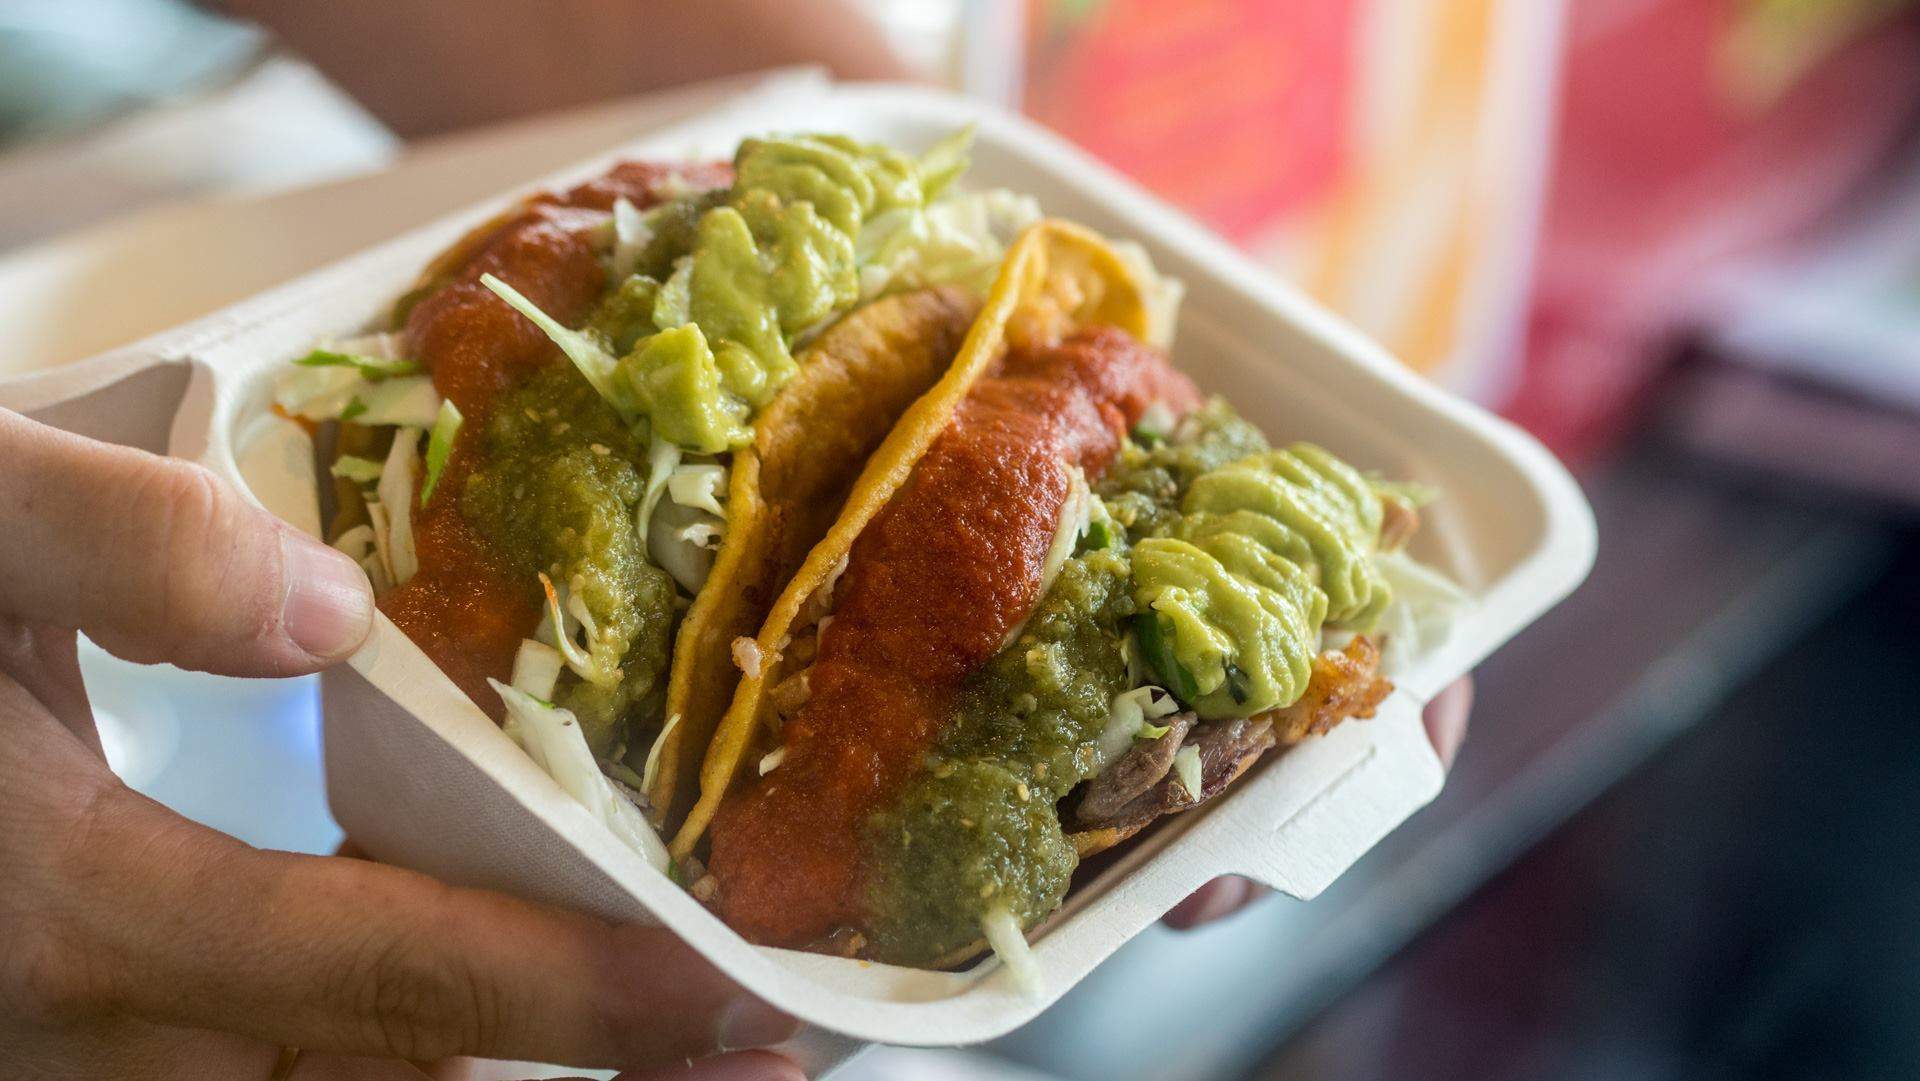 Where to Find the Best Tacos in Wellington